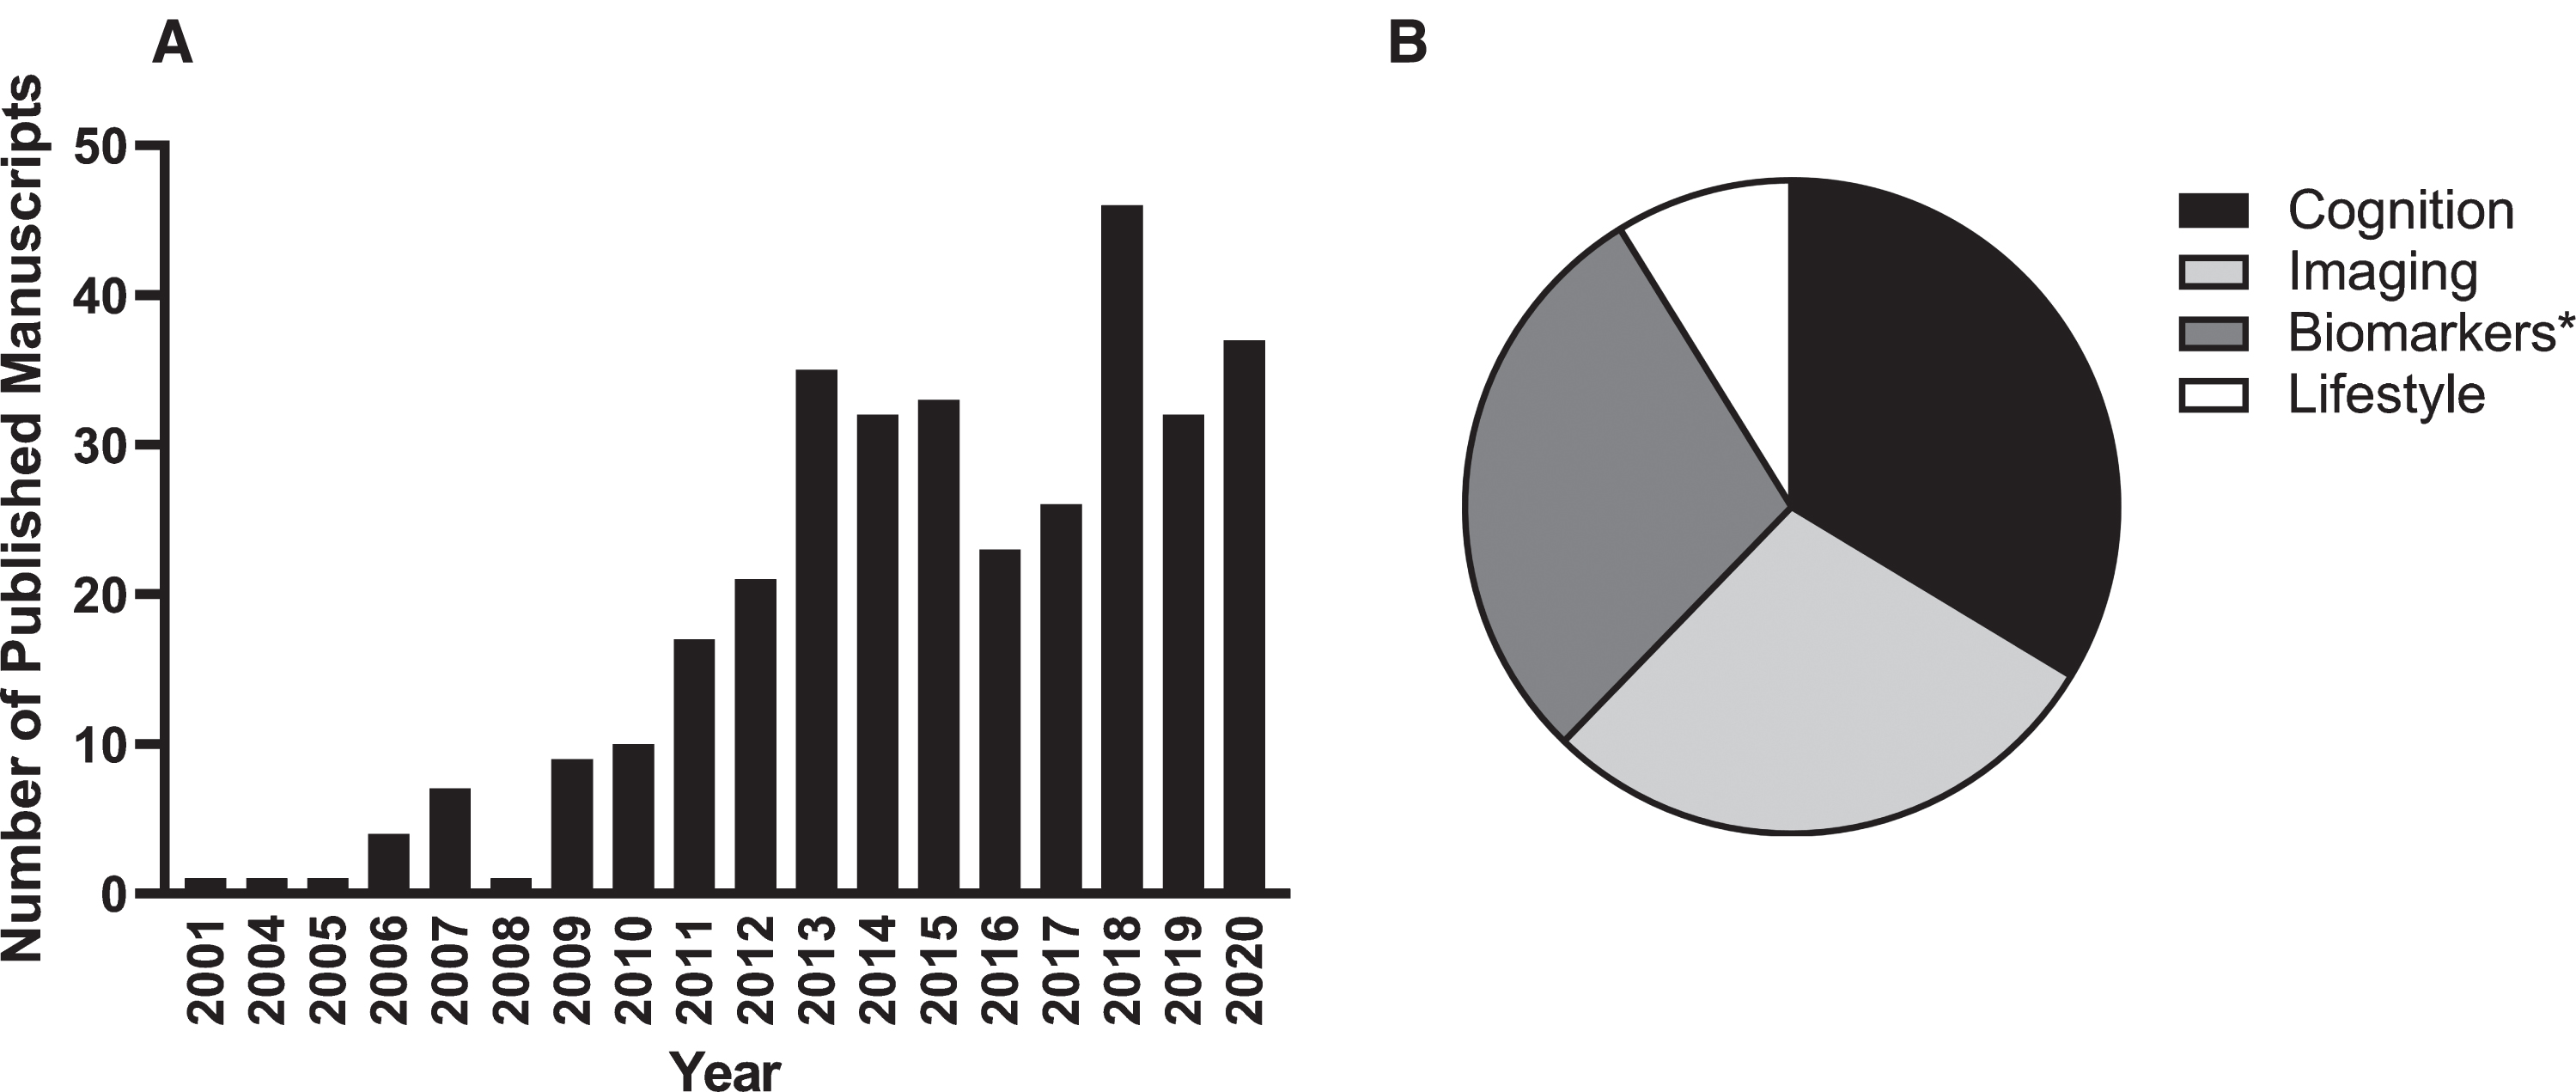 AIBL-related publications by calendar year (A) and by primary research focus (B). At the time of writing, more than 340 AIBL-related manuscripts have been published since study commencement. *Biomarker publications include those related to fluid biomarkers (blood, cerebrospinal fluid), buccal cells and genetics.